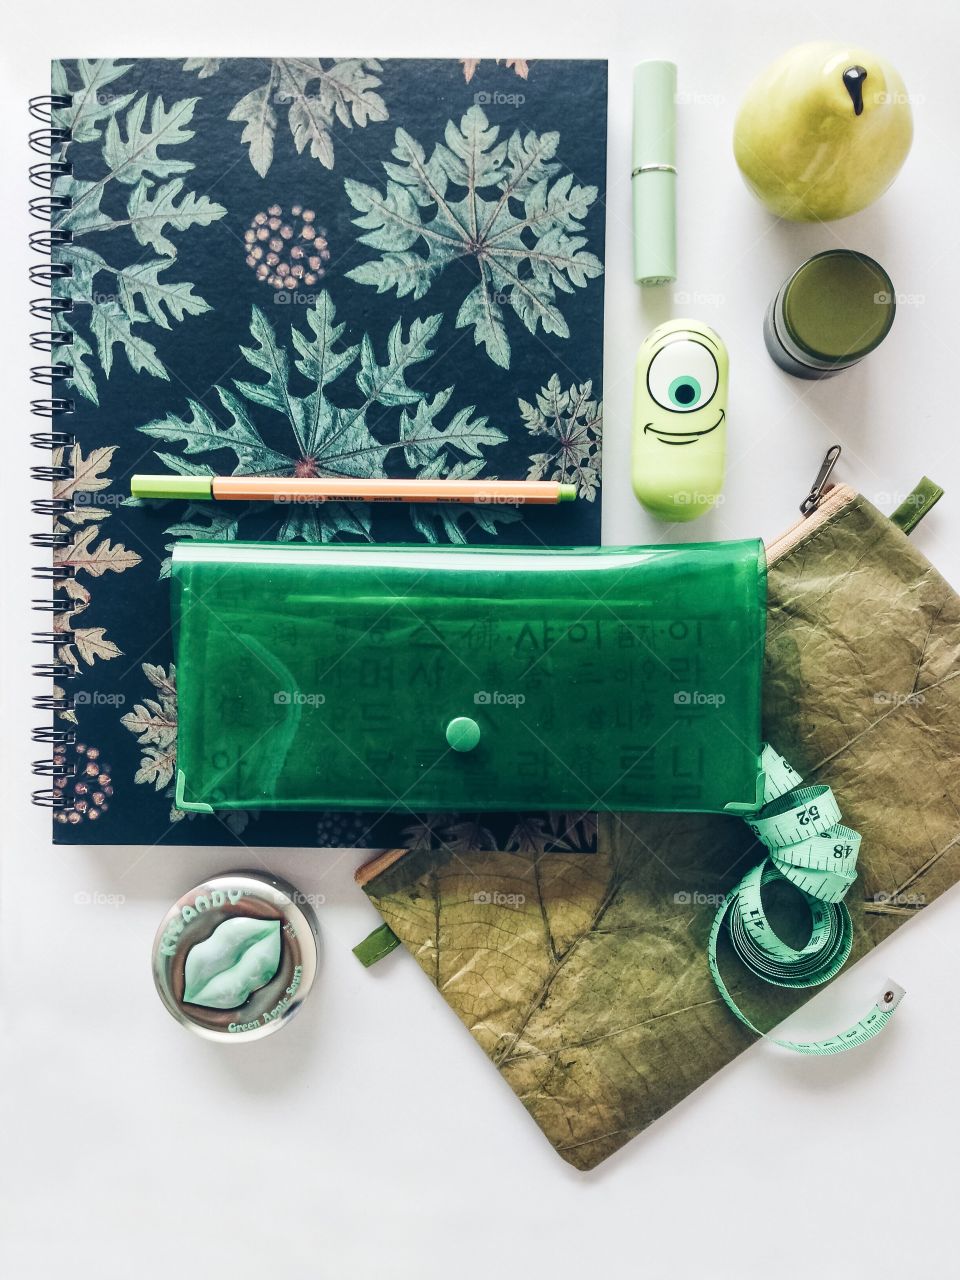 Awesome fashion flat lays with green items.